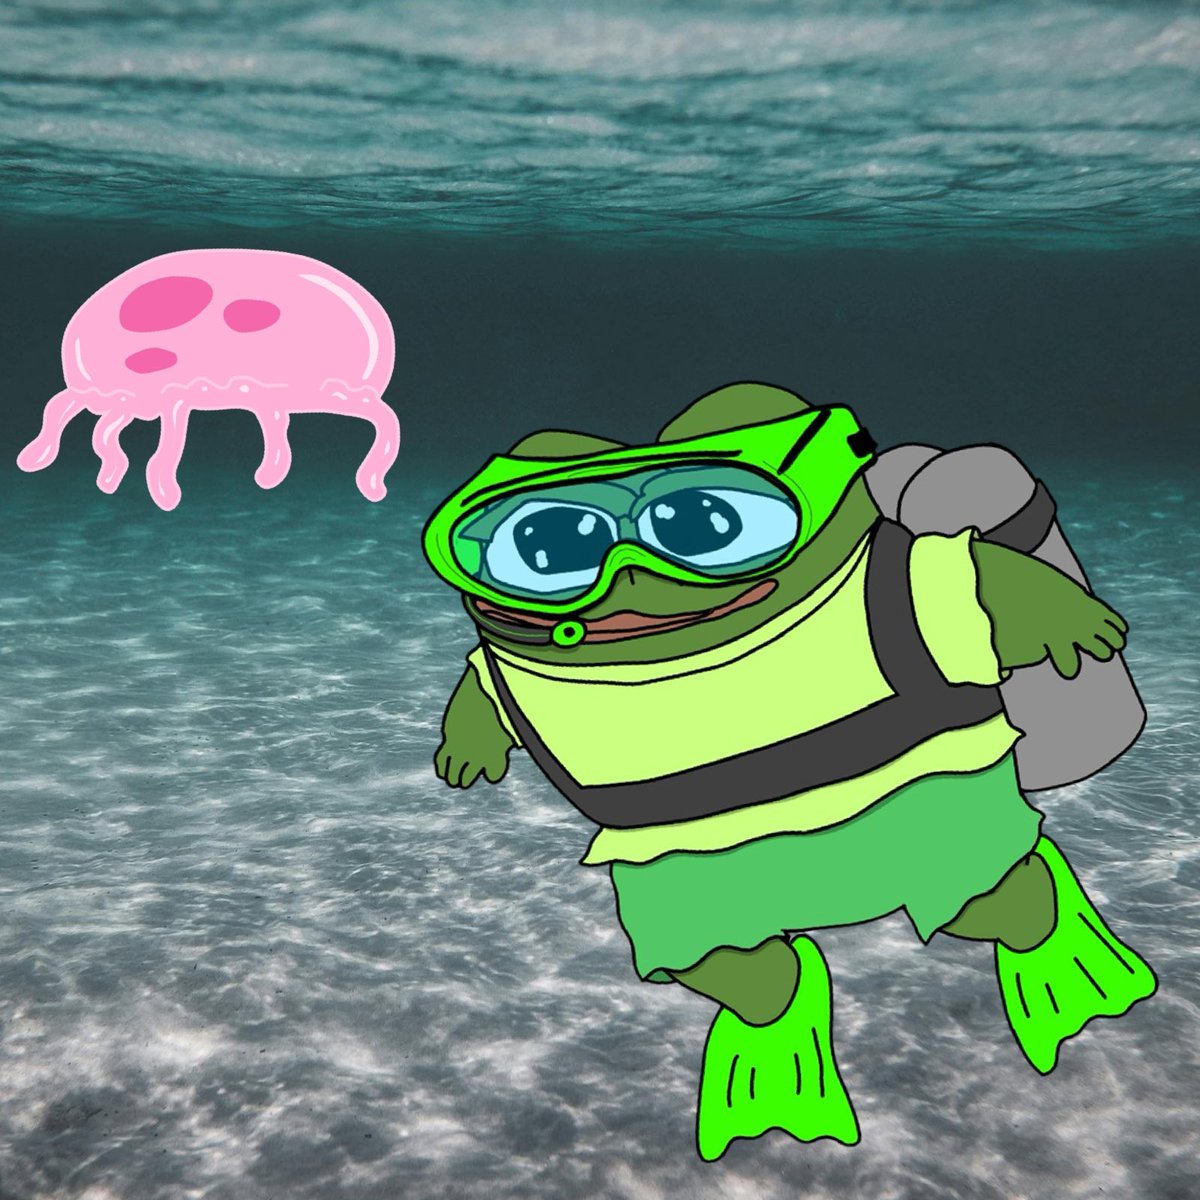 are u jellyfish maxing, anon? 🪼 (i drew a frenly lil scuba diver) 🫧